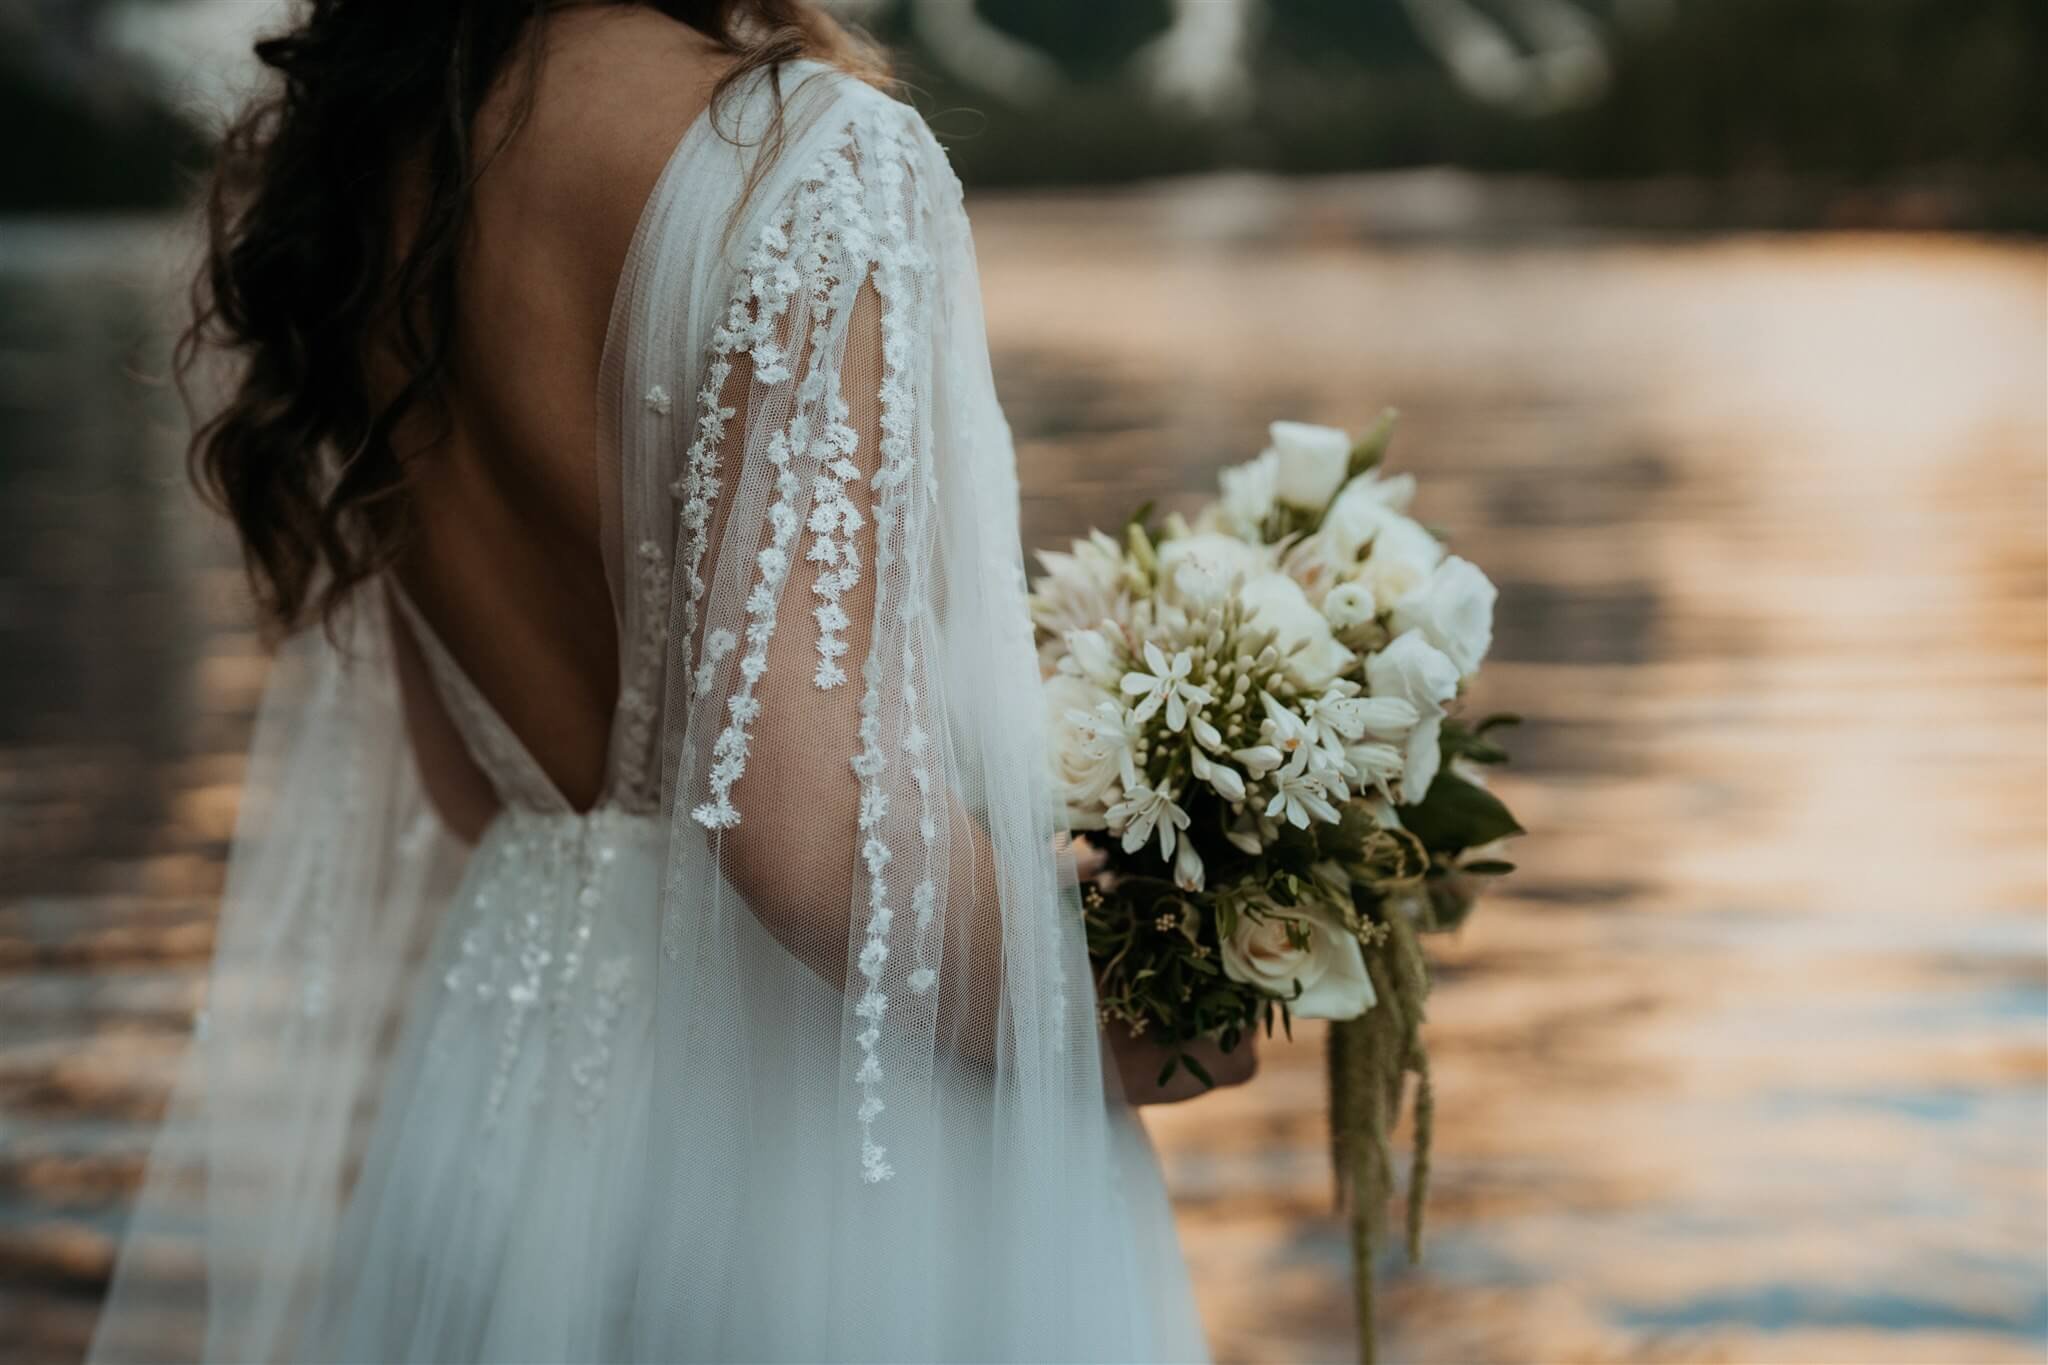 Bride wearing backless lace wedding dress with cape sleeves